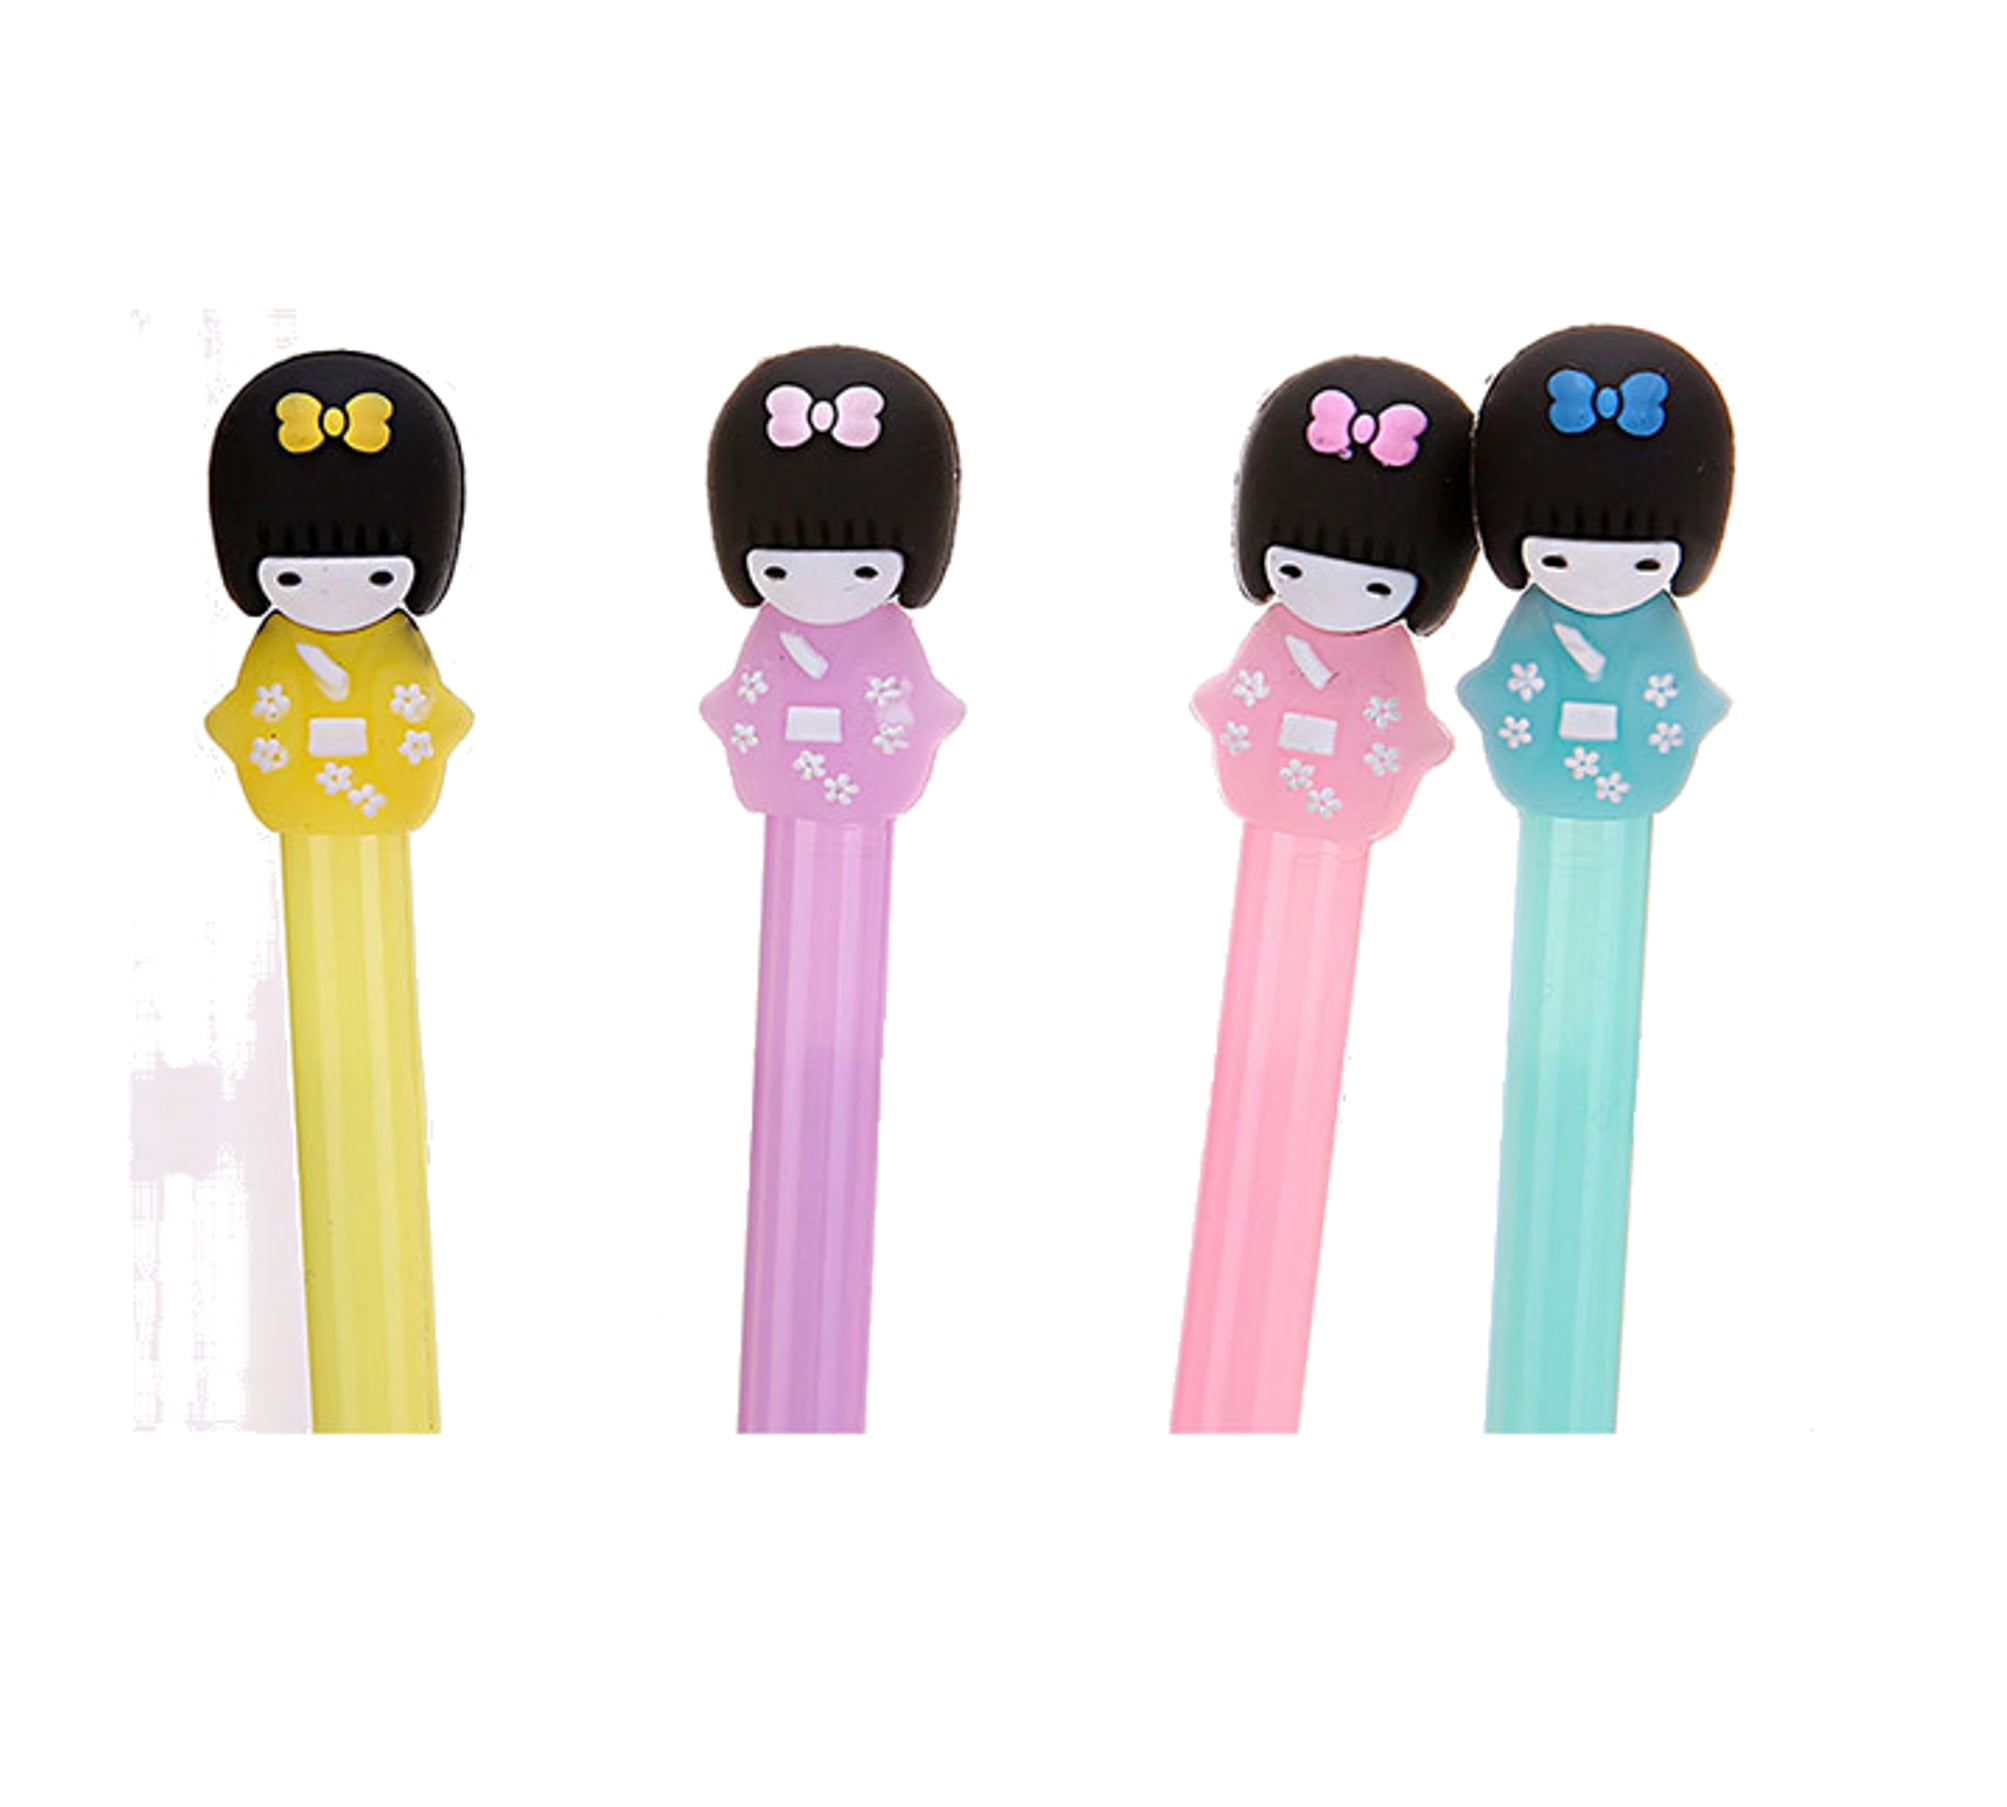 4 Pcs Asian Doll Ink Pen Assorted Colors School Supply Home Office  Stationary O-Pen7 